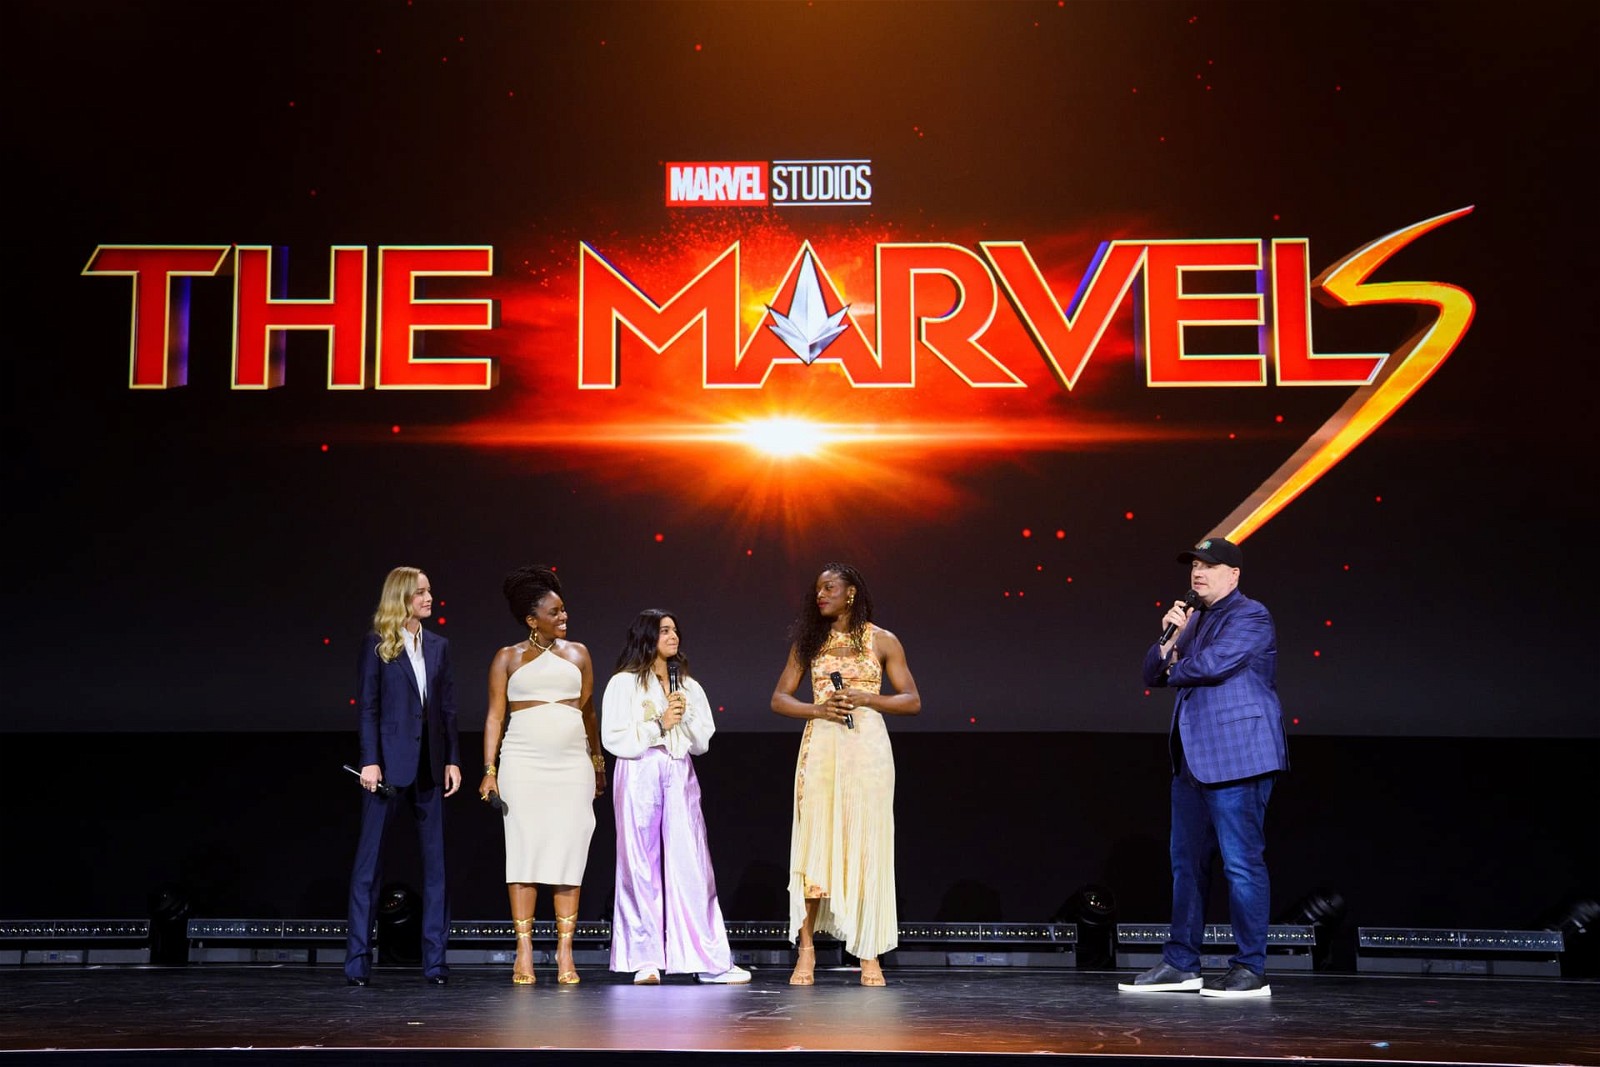 The Marvels cast with Kevin Feige at D23 Expo